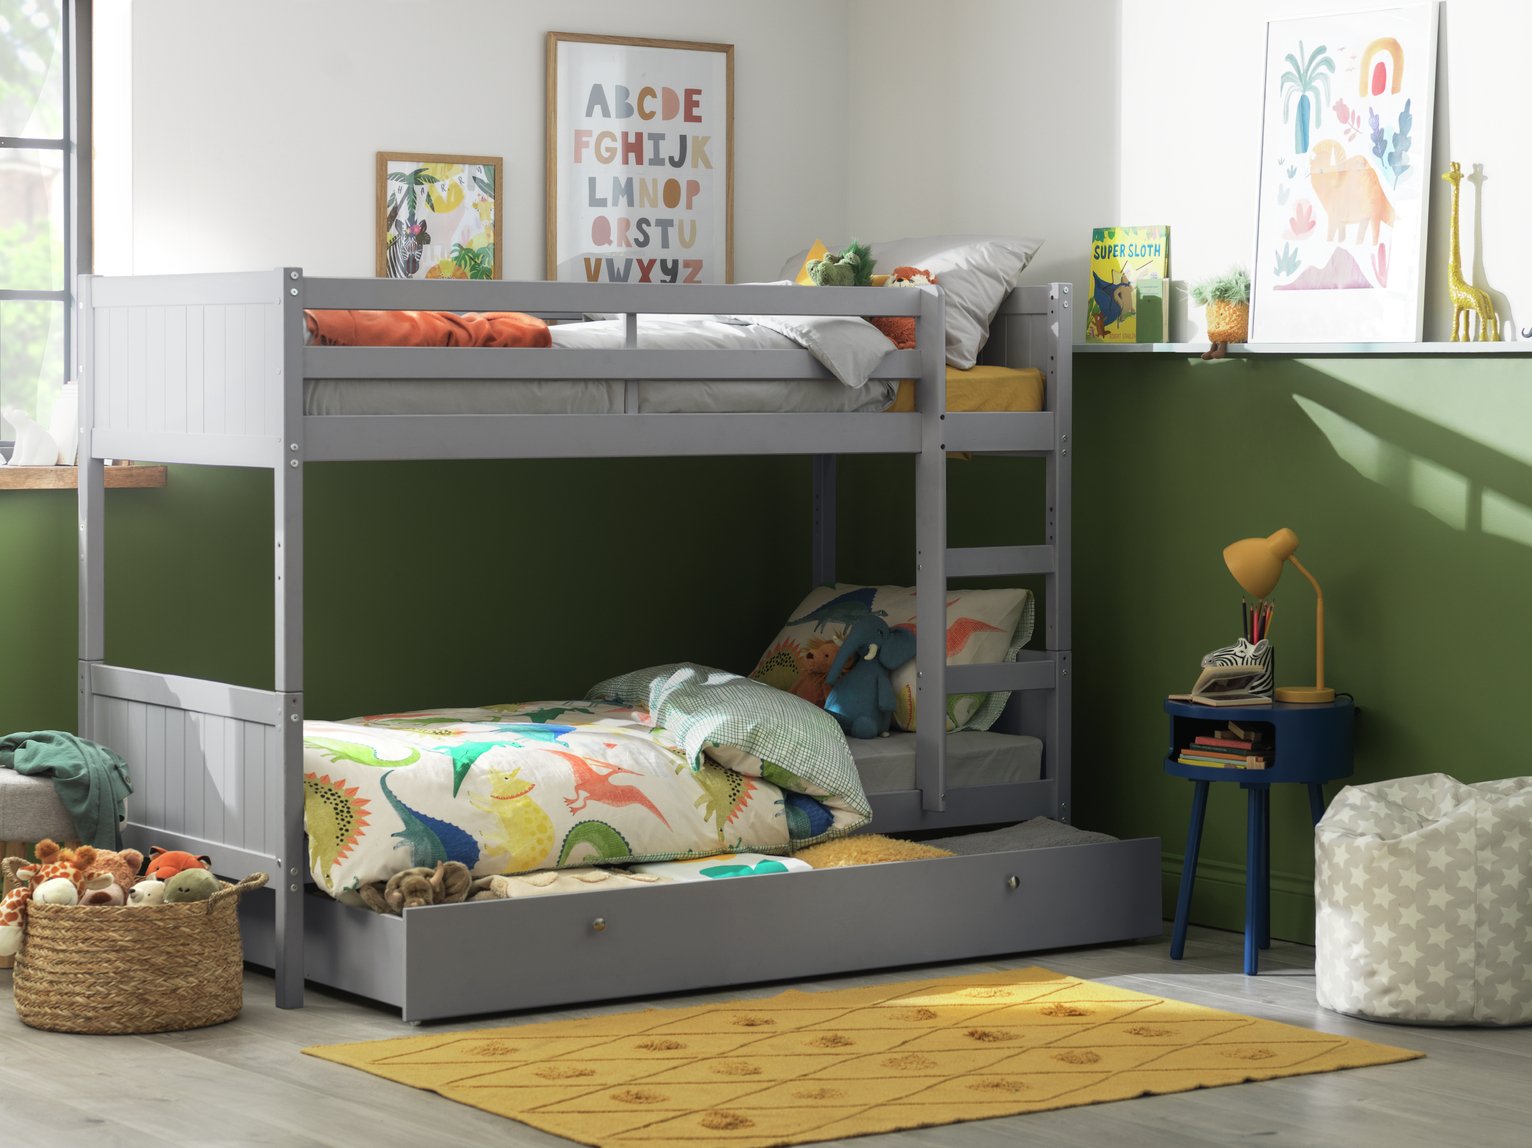 Argos Home Heavy Duty Grey Bunk Bed, Drawer & 2 Mattresses review